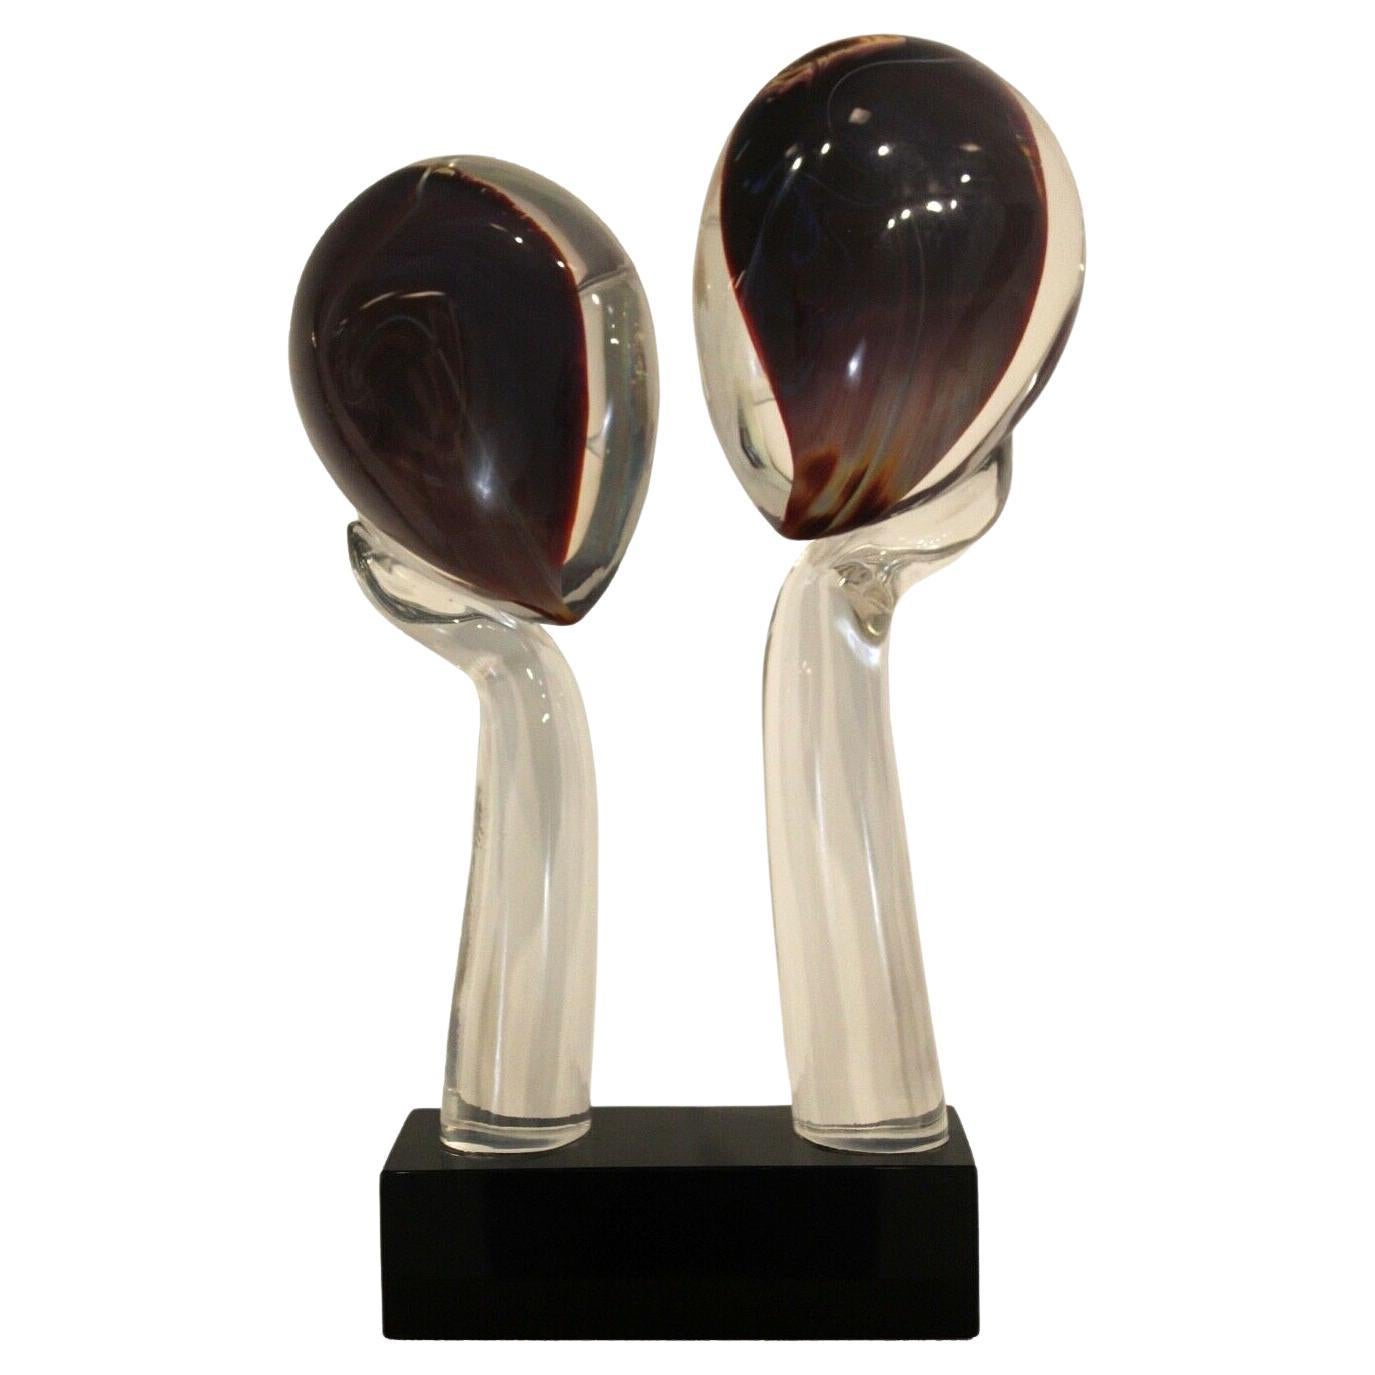 From Le Shoppe Too in Michigan this brilliant glass figurative sculpture, abstract in nature, represents two faces leaning on hands. Inlaid colors on the reverse give this sculpture a variety of tones and shades. Inscribed signature on base. by the